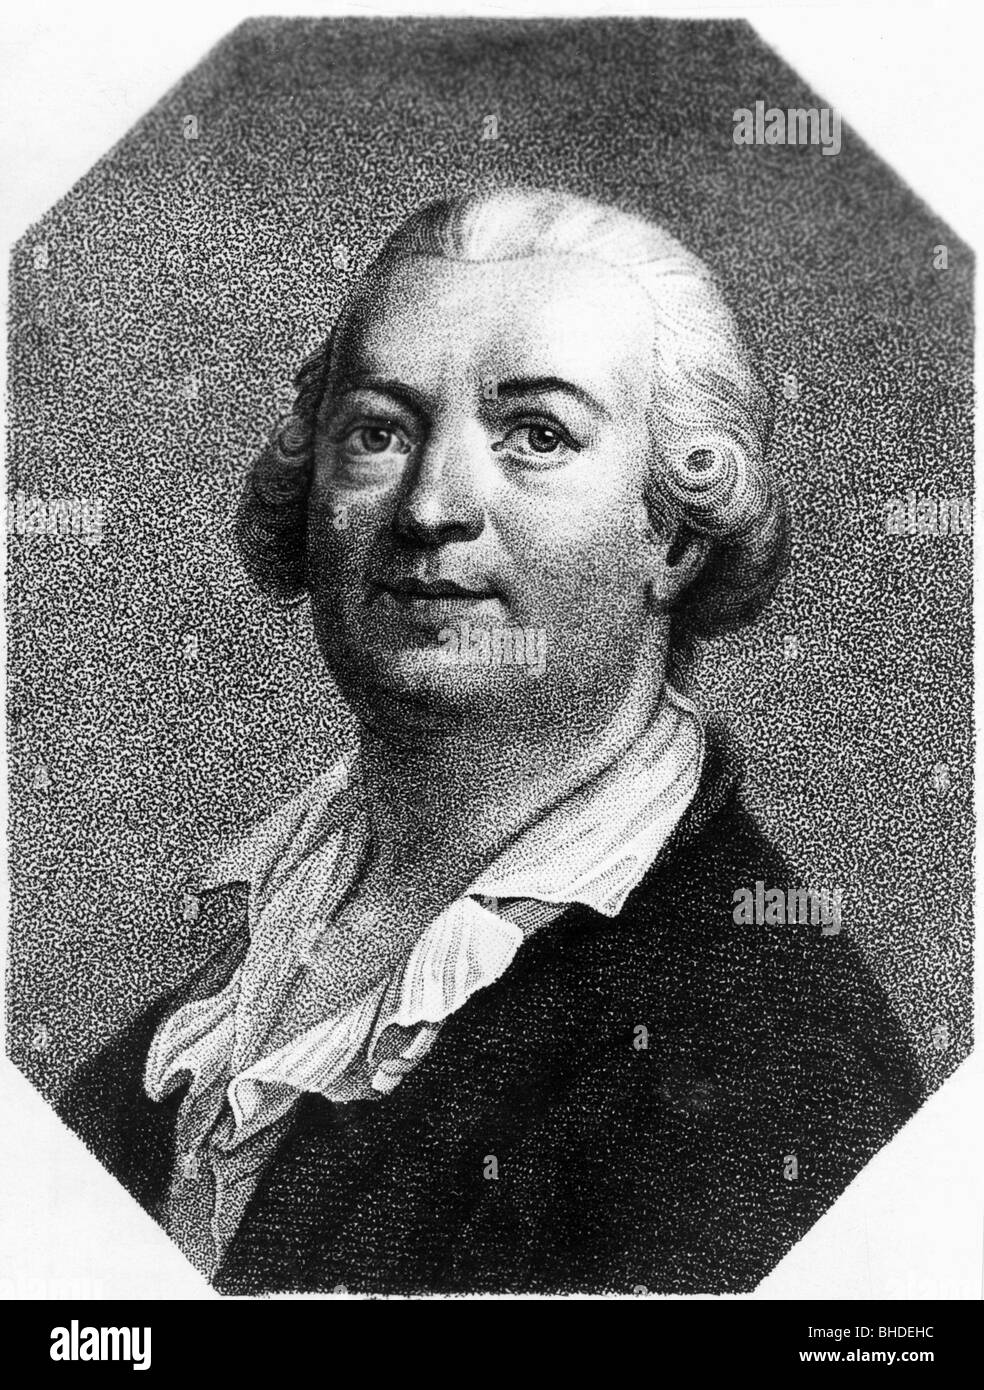 Cagliostro, Count Alessandro di, 8.6.1743 - 26.12.1795, Italian adventurer, portrait, later steel engraving, Artist's Copyright has not to be cleared Stock Photo